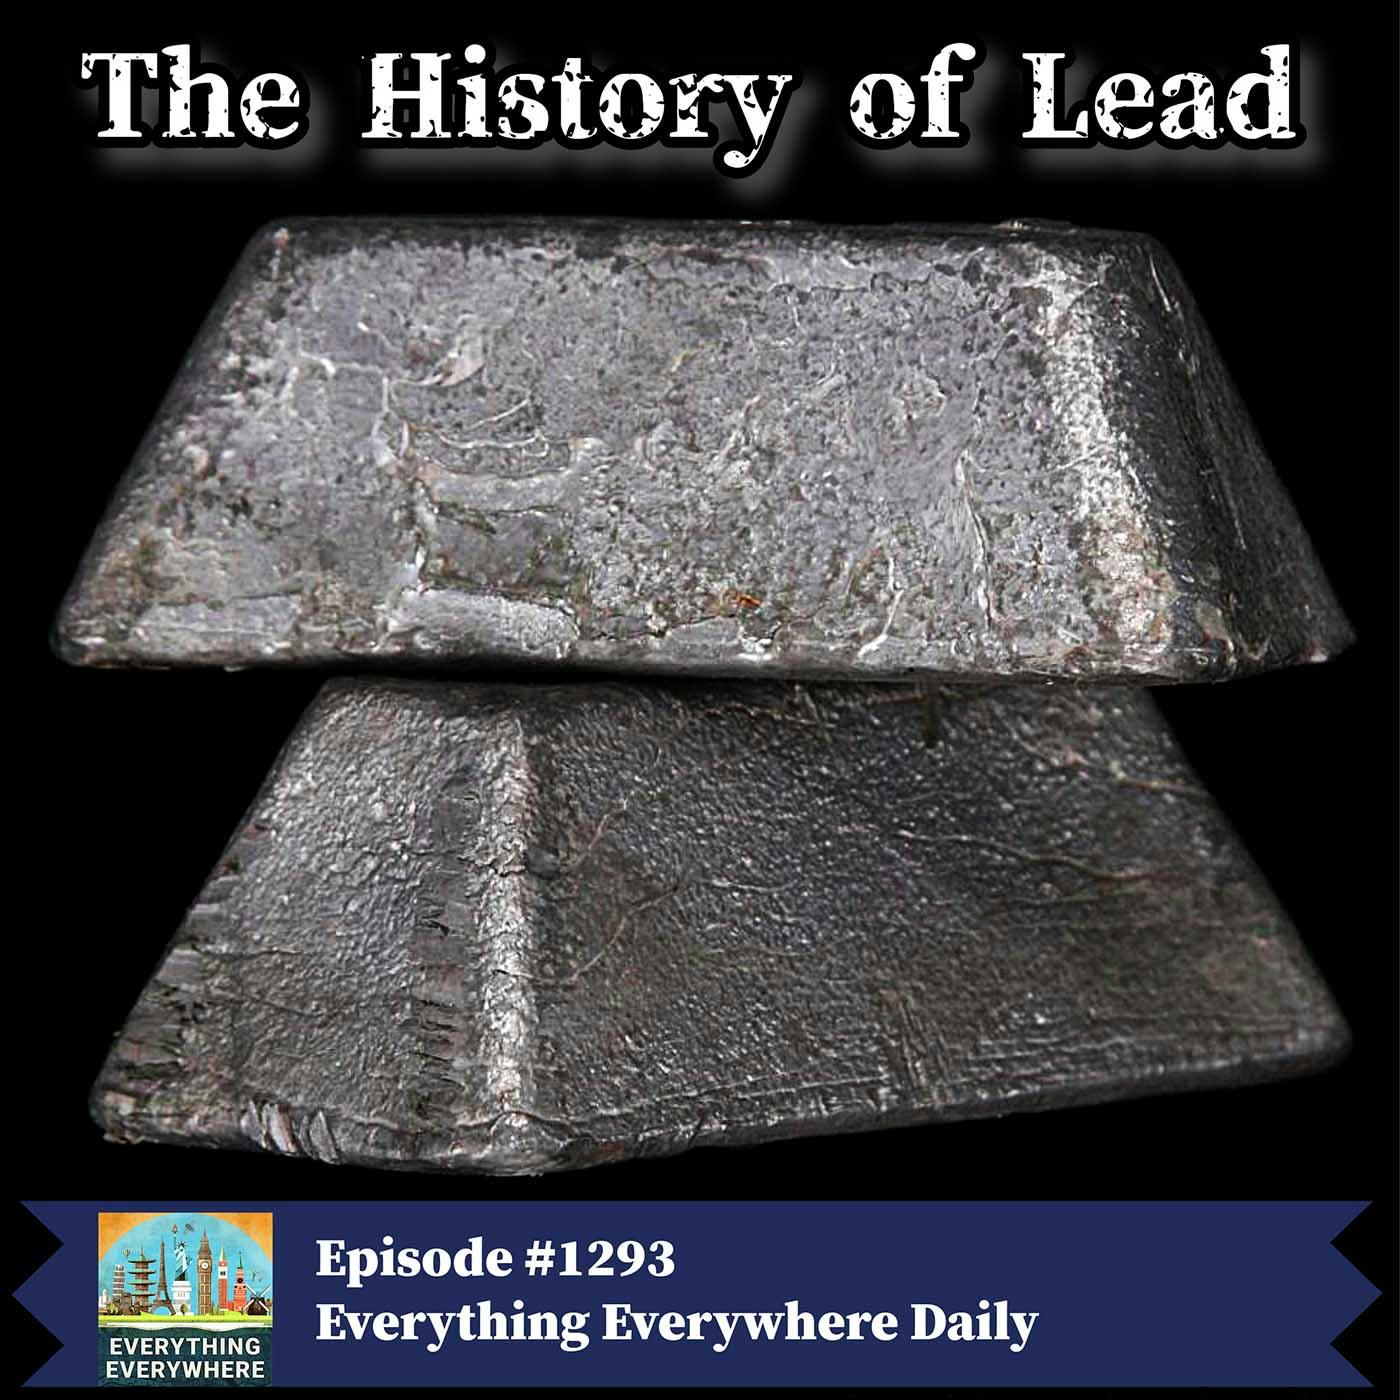 A History of Lead